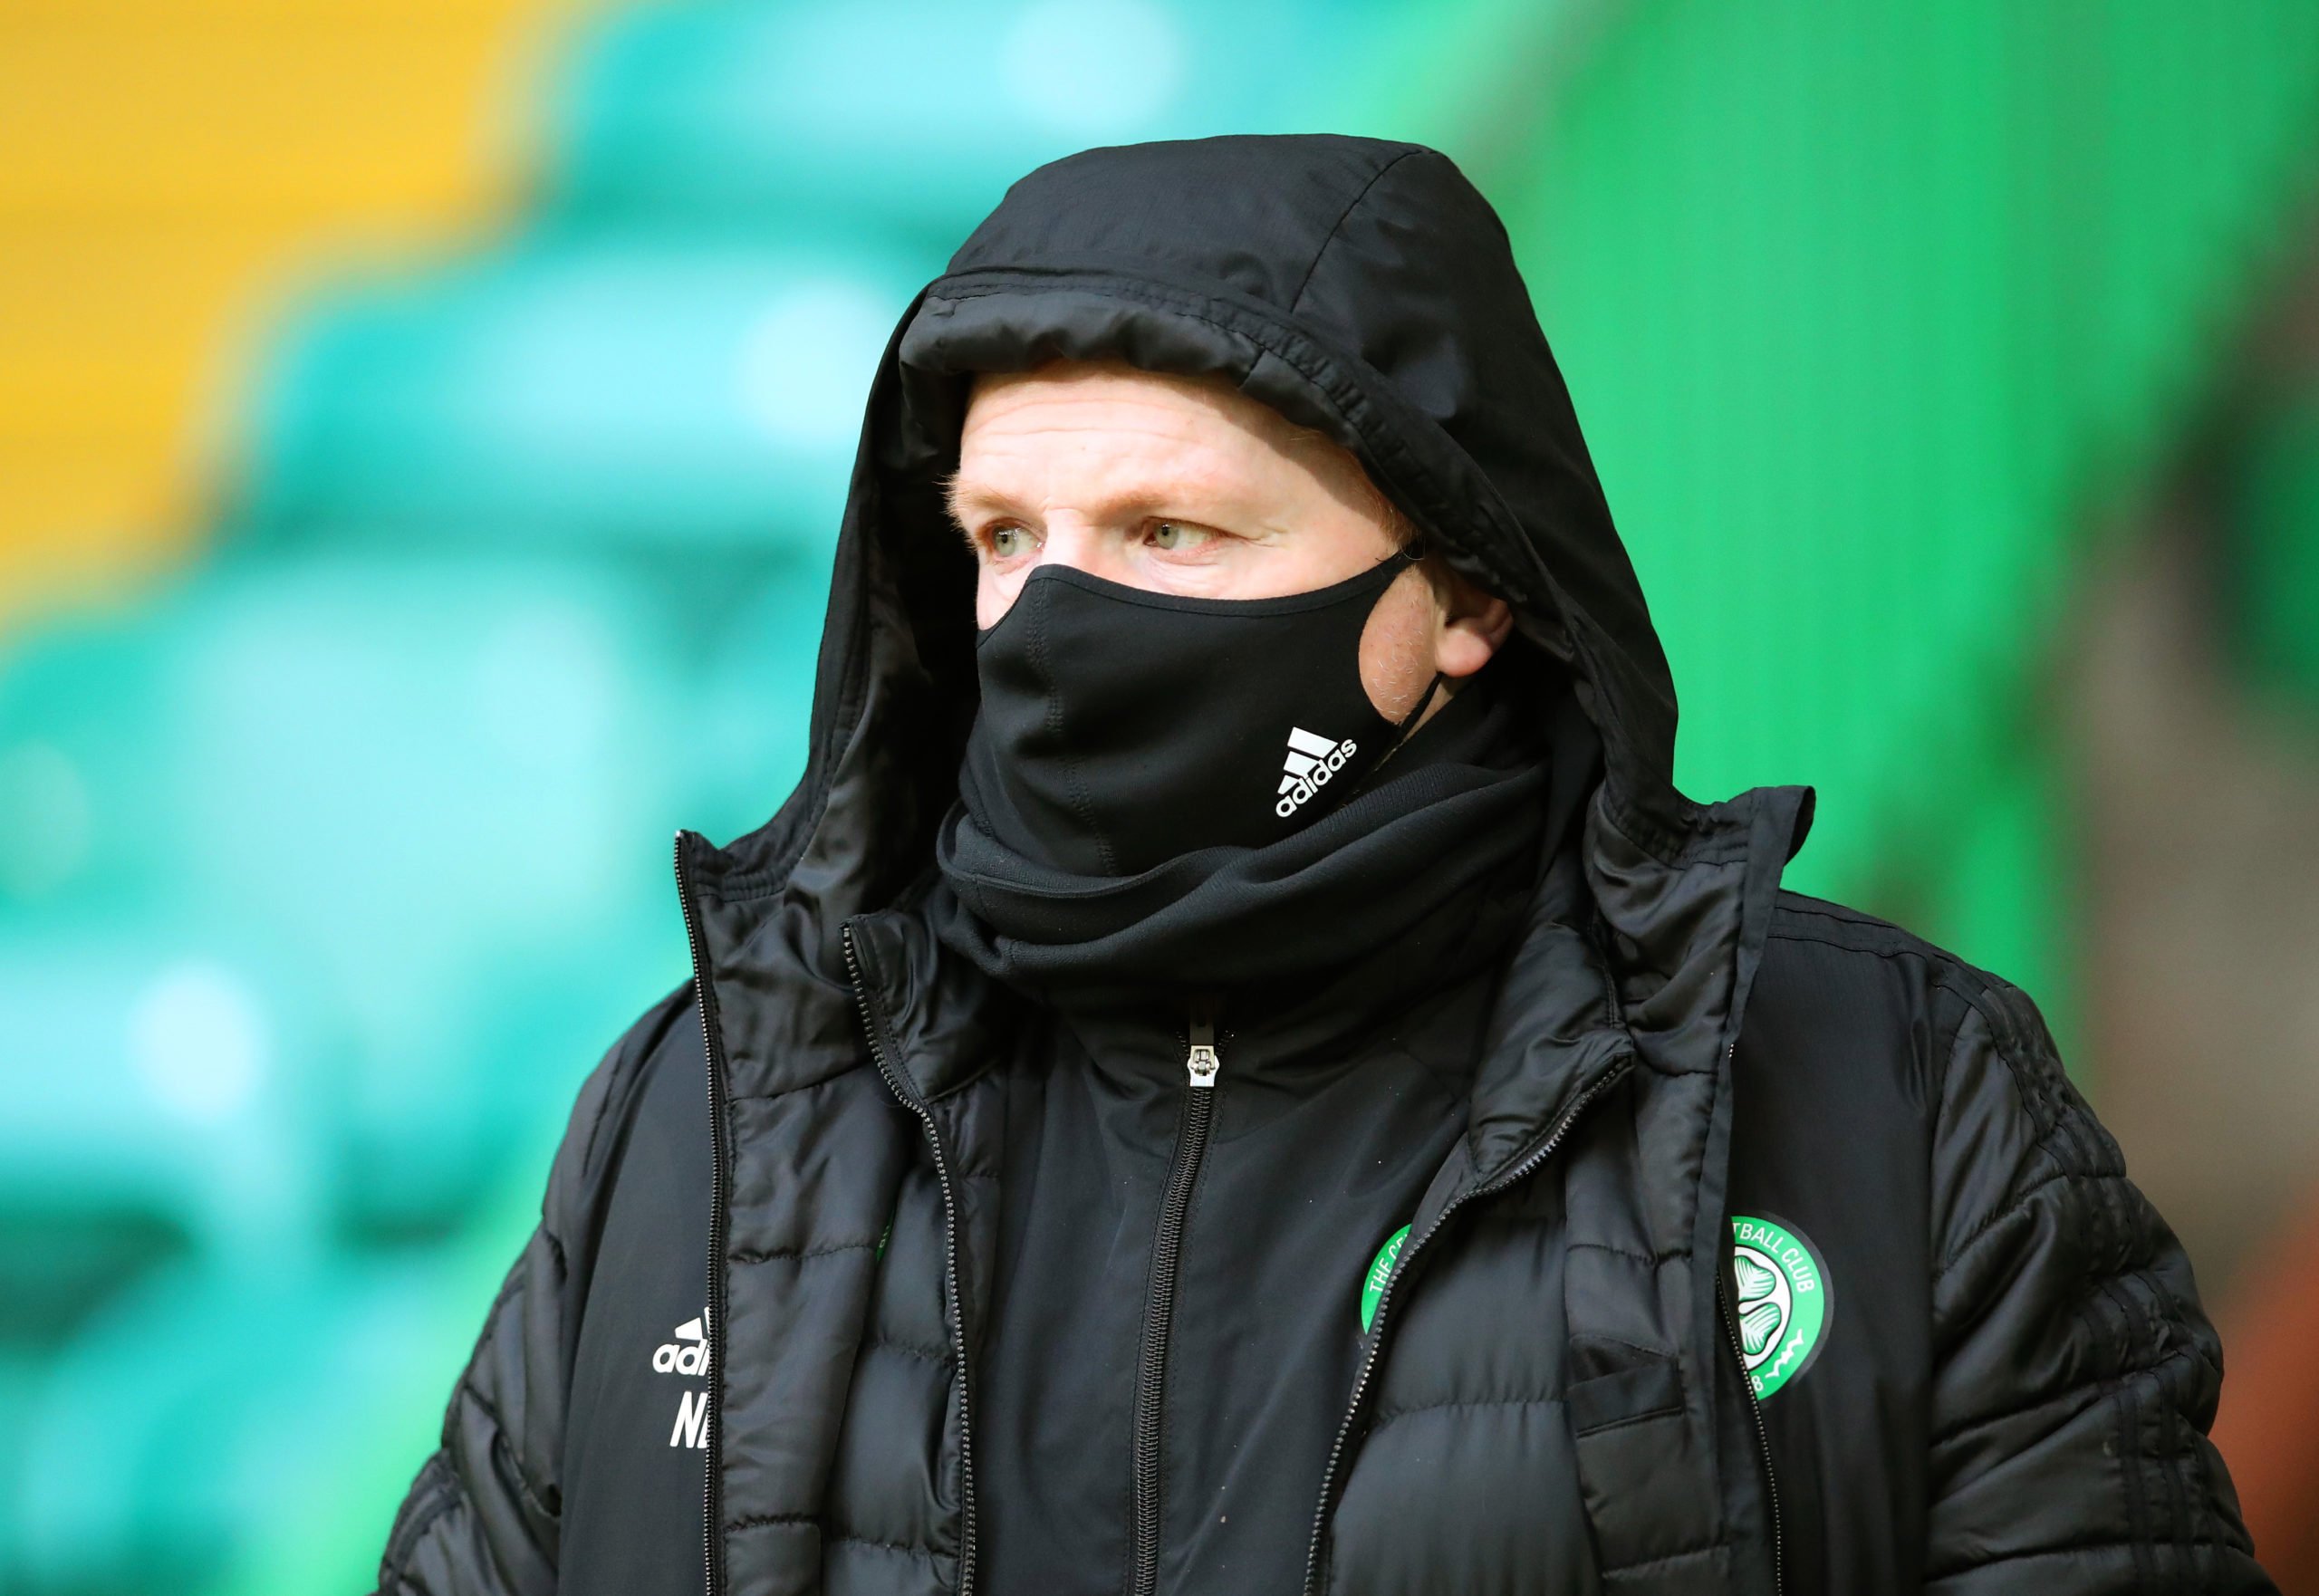 Neil Lennon launches stinging attack on the press after explosive Celtic interview last month